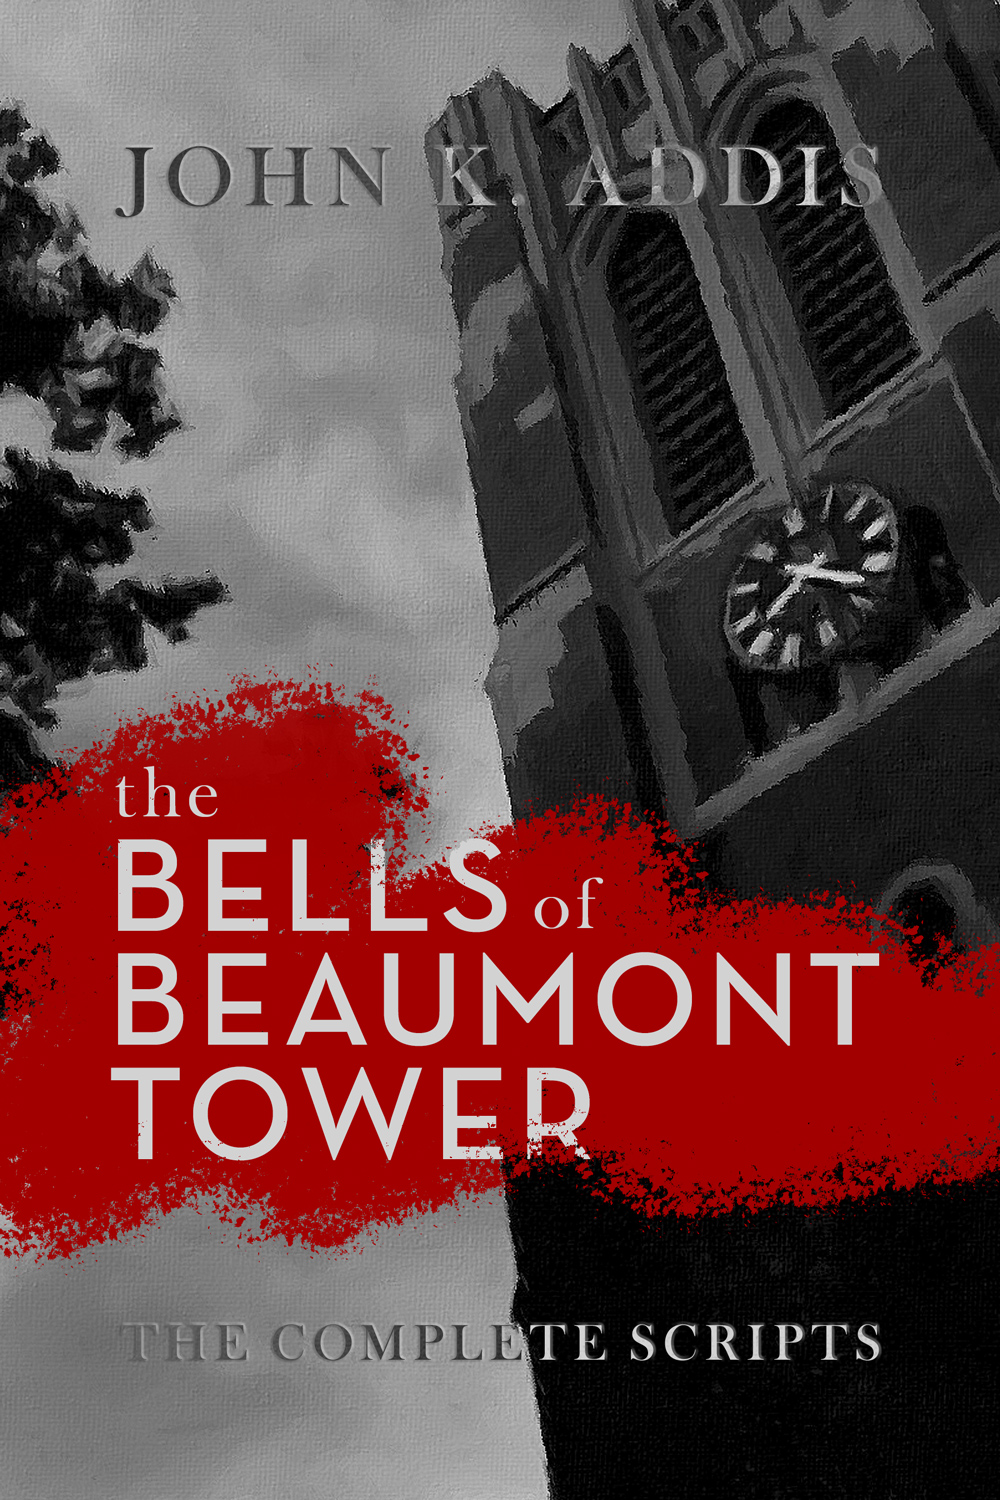 The Bells of Beaumont Tower by Award-Winning Author John K. Addis